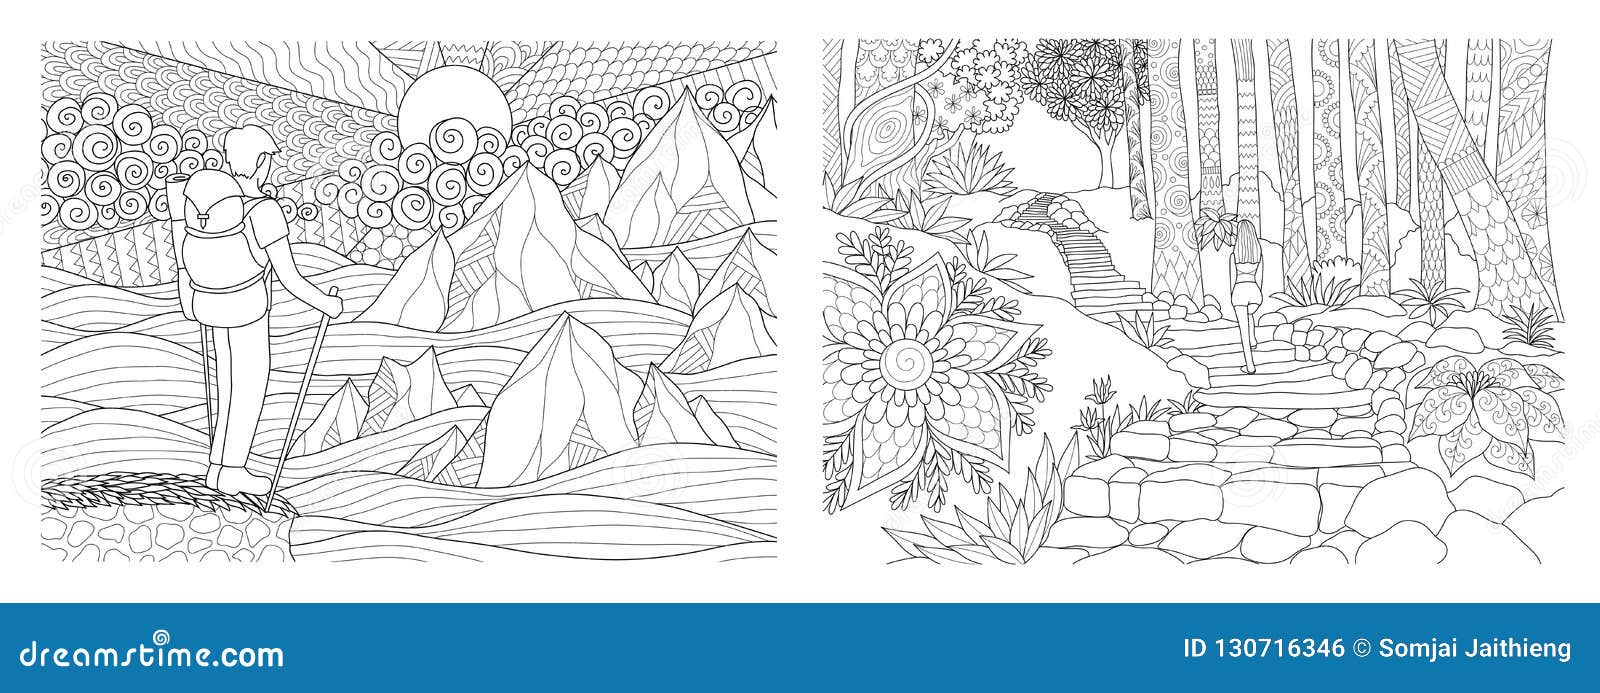 Traveling in nature adult coloring pages collection vector illustration stock vector